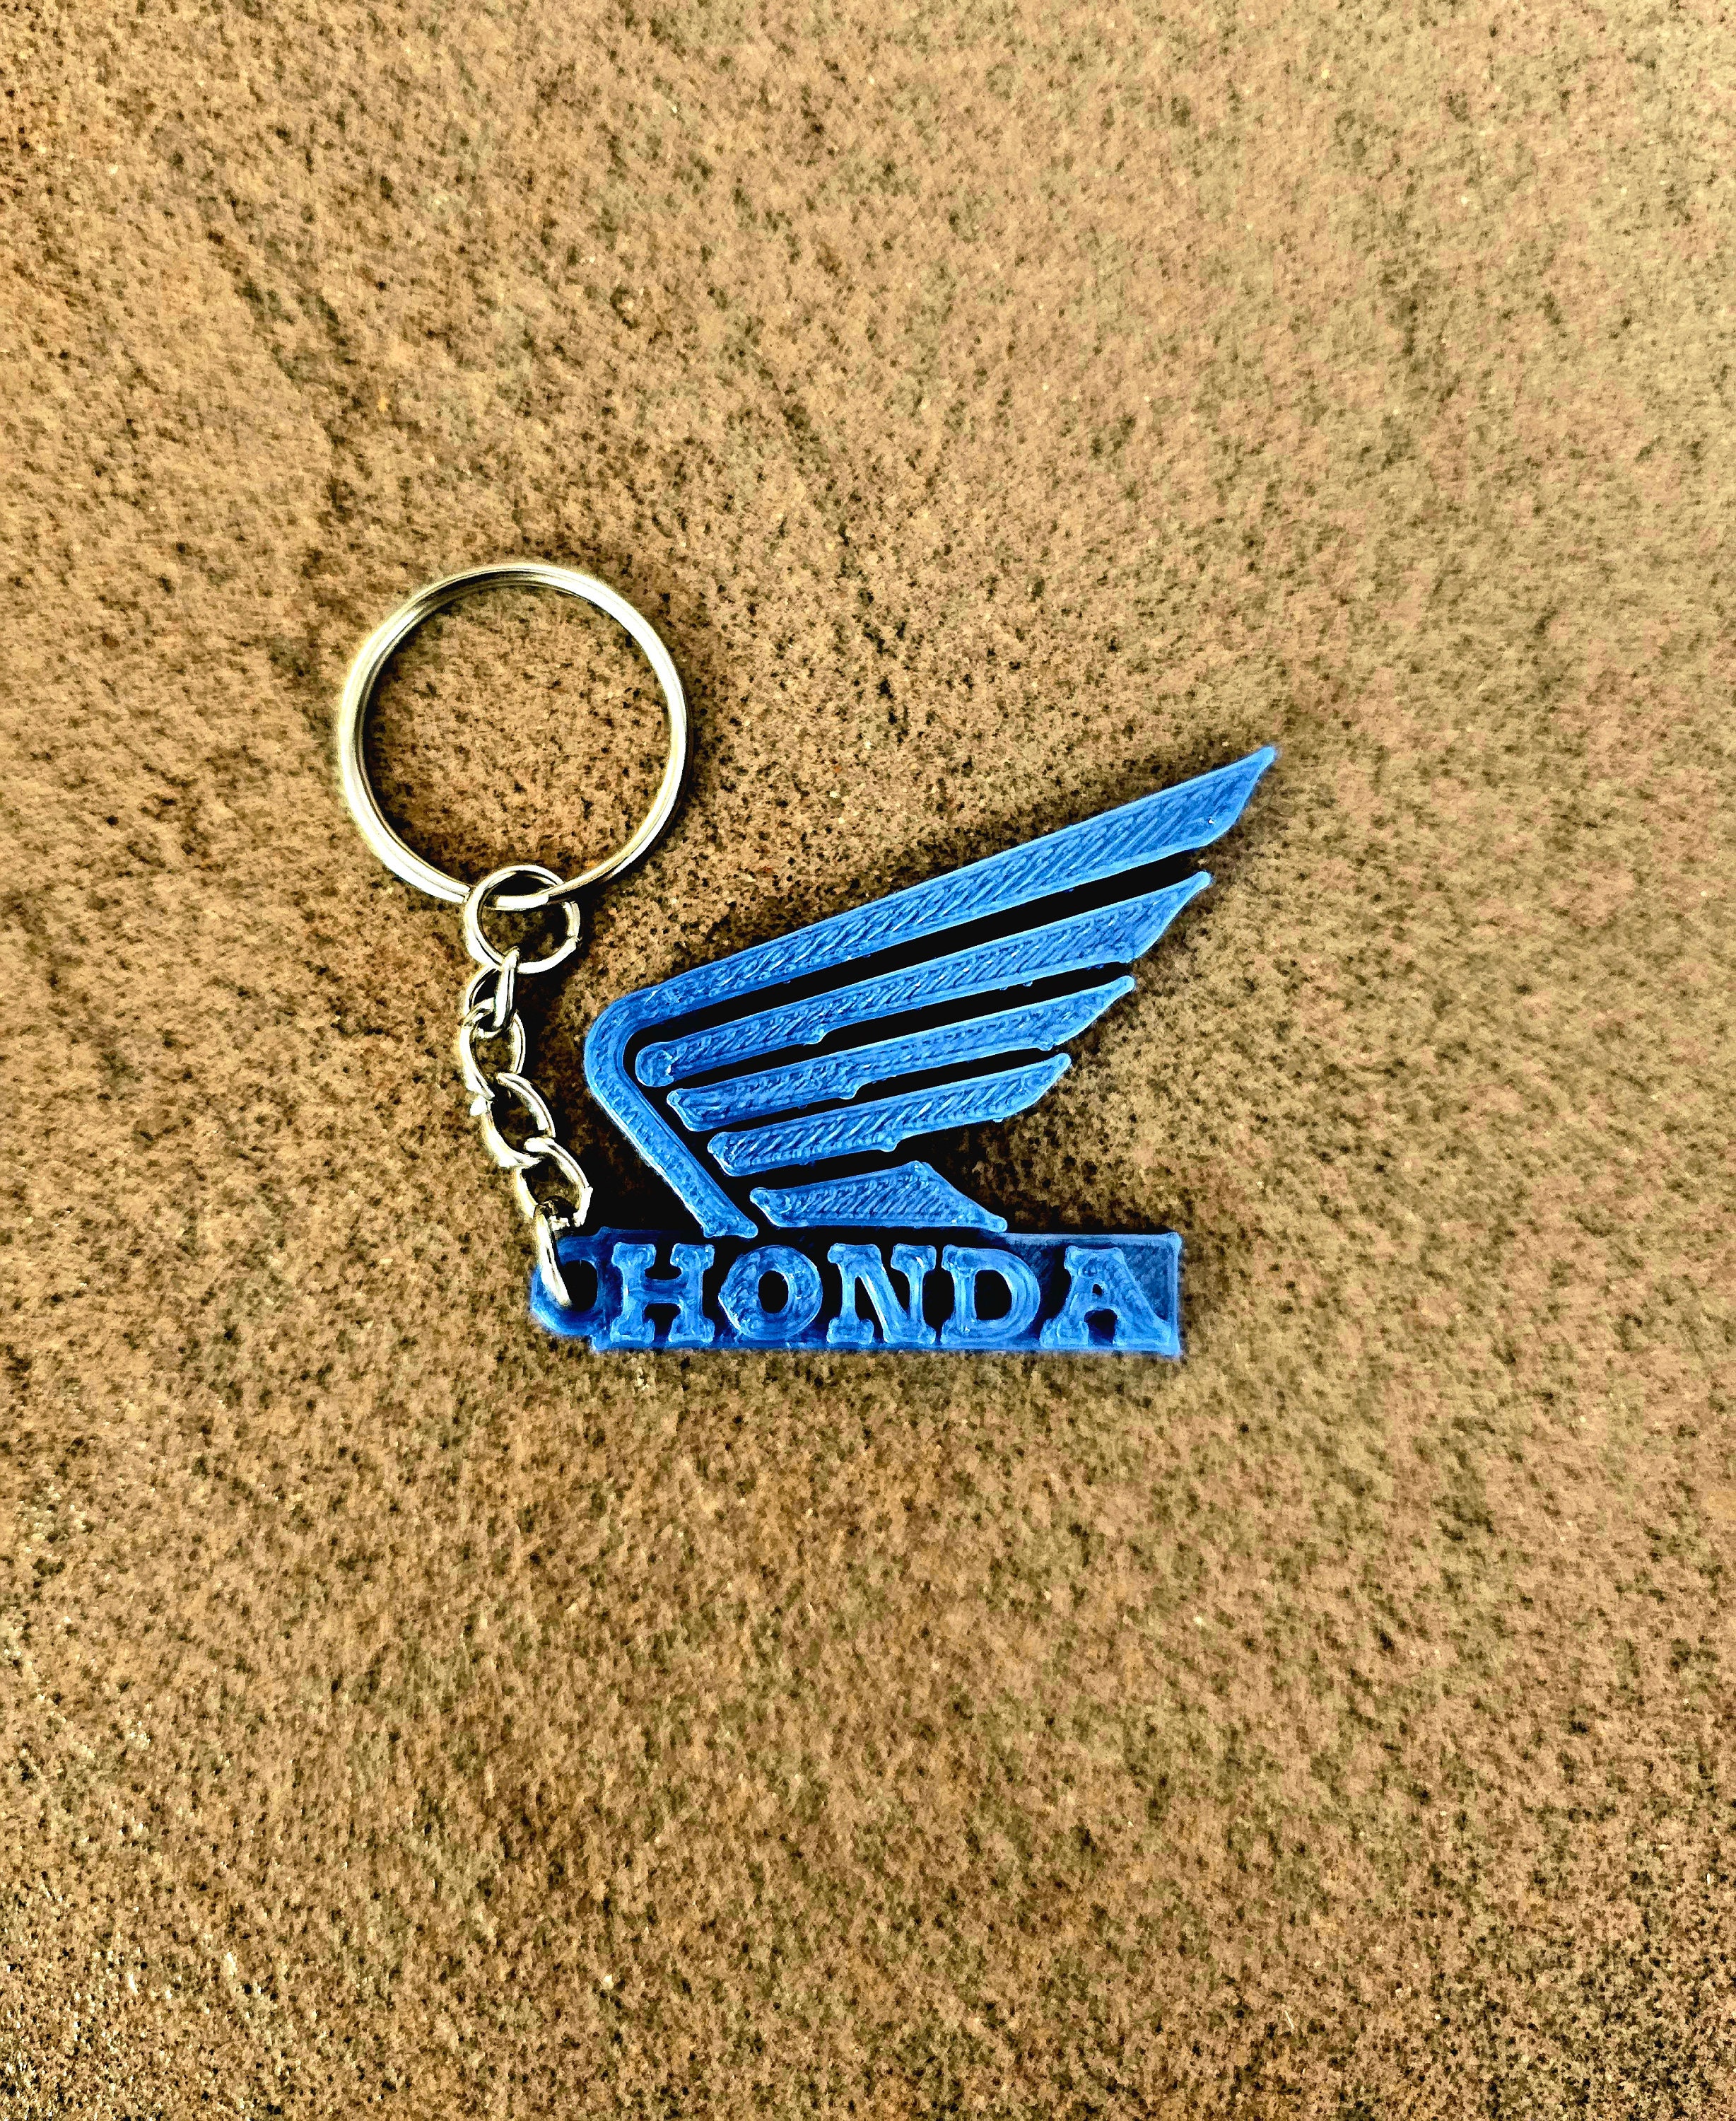 Rubber White Red Honda Wing Keychain Key Ring Motorcycle Collectables gift  | eBay